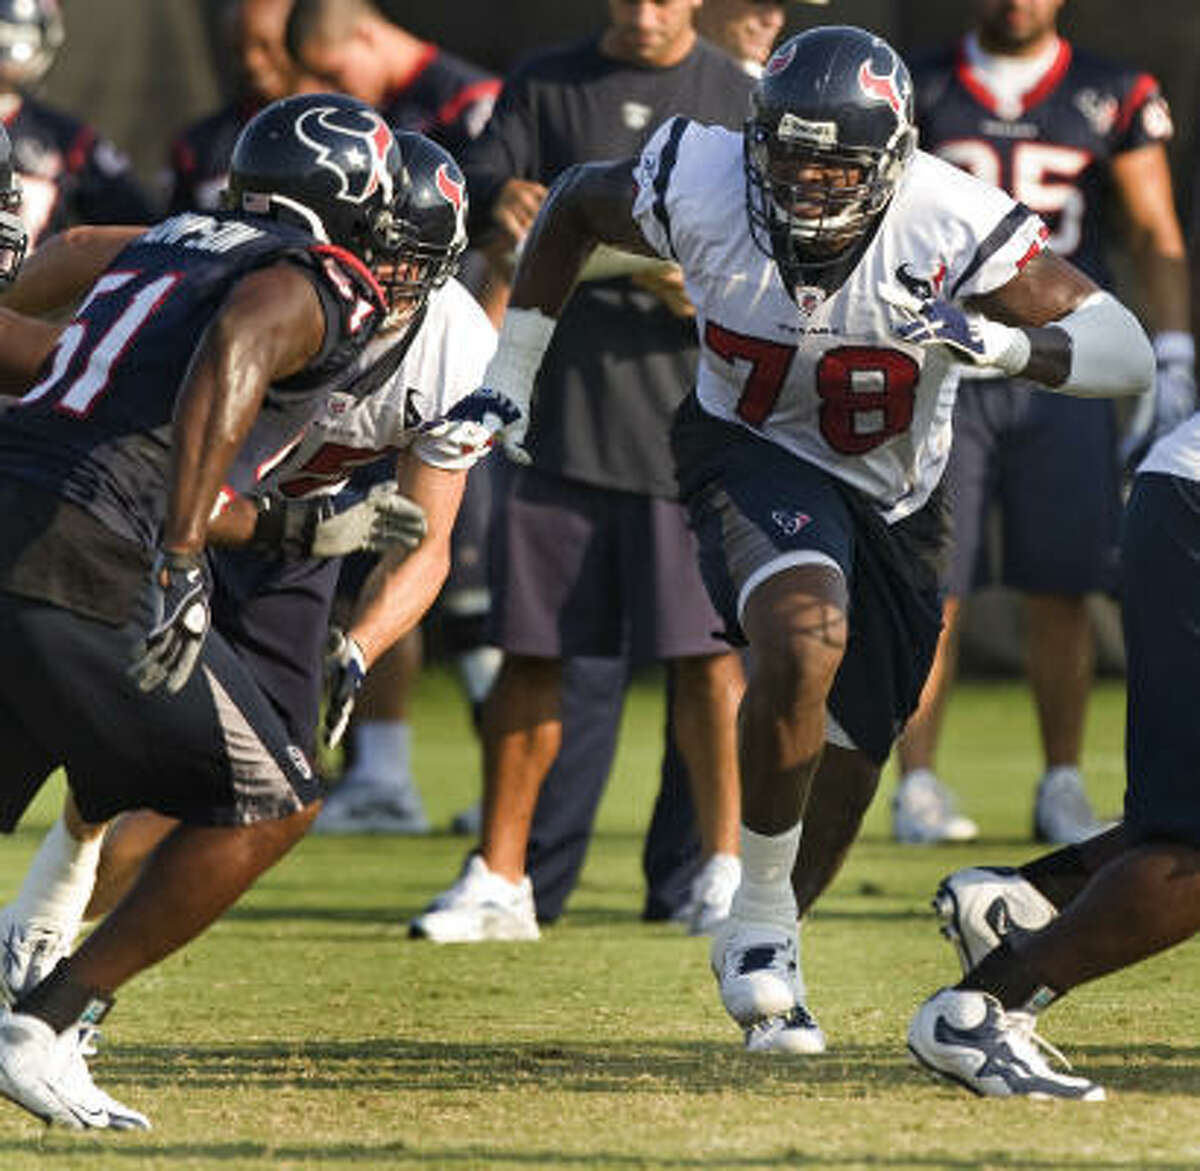 In 2010, Rashad Butler (78) served as the backup to left tackle Duane Brown and right tackle Eric Winston.